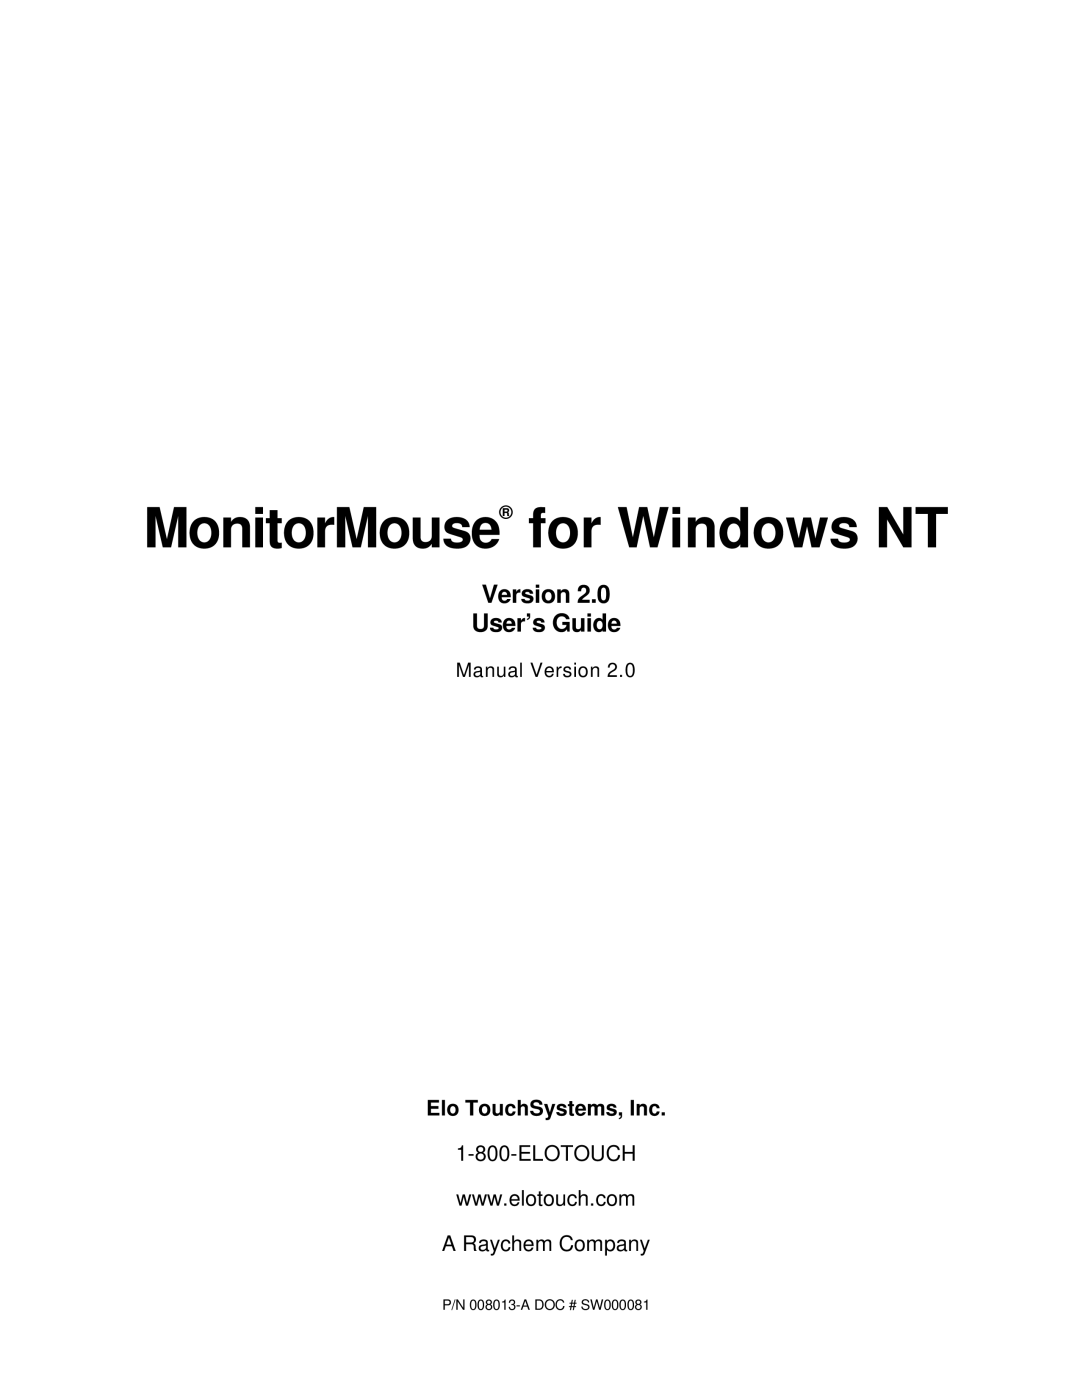 Elo TouchSystems MonitorMouse FOR WINDOWS NT Version 2.0 MonitorMouse for Windows NT, Version User’s Guide, Manual Version 